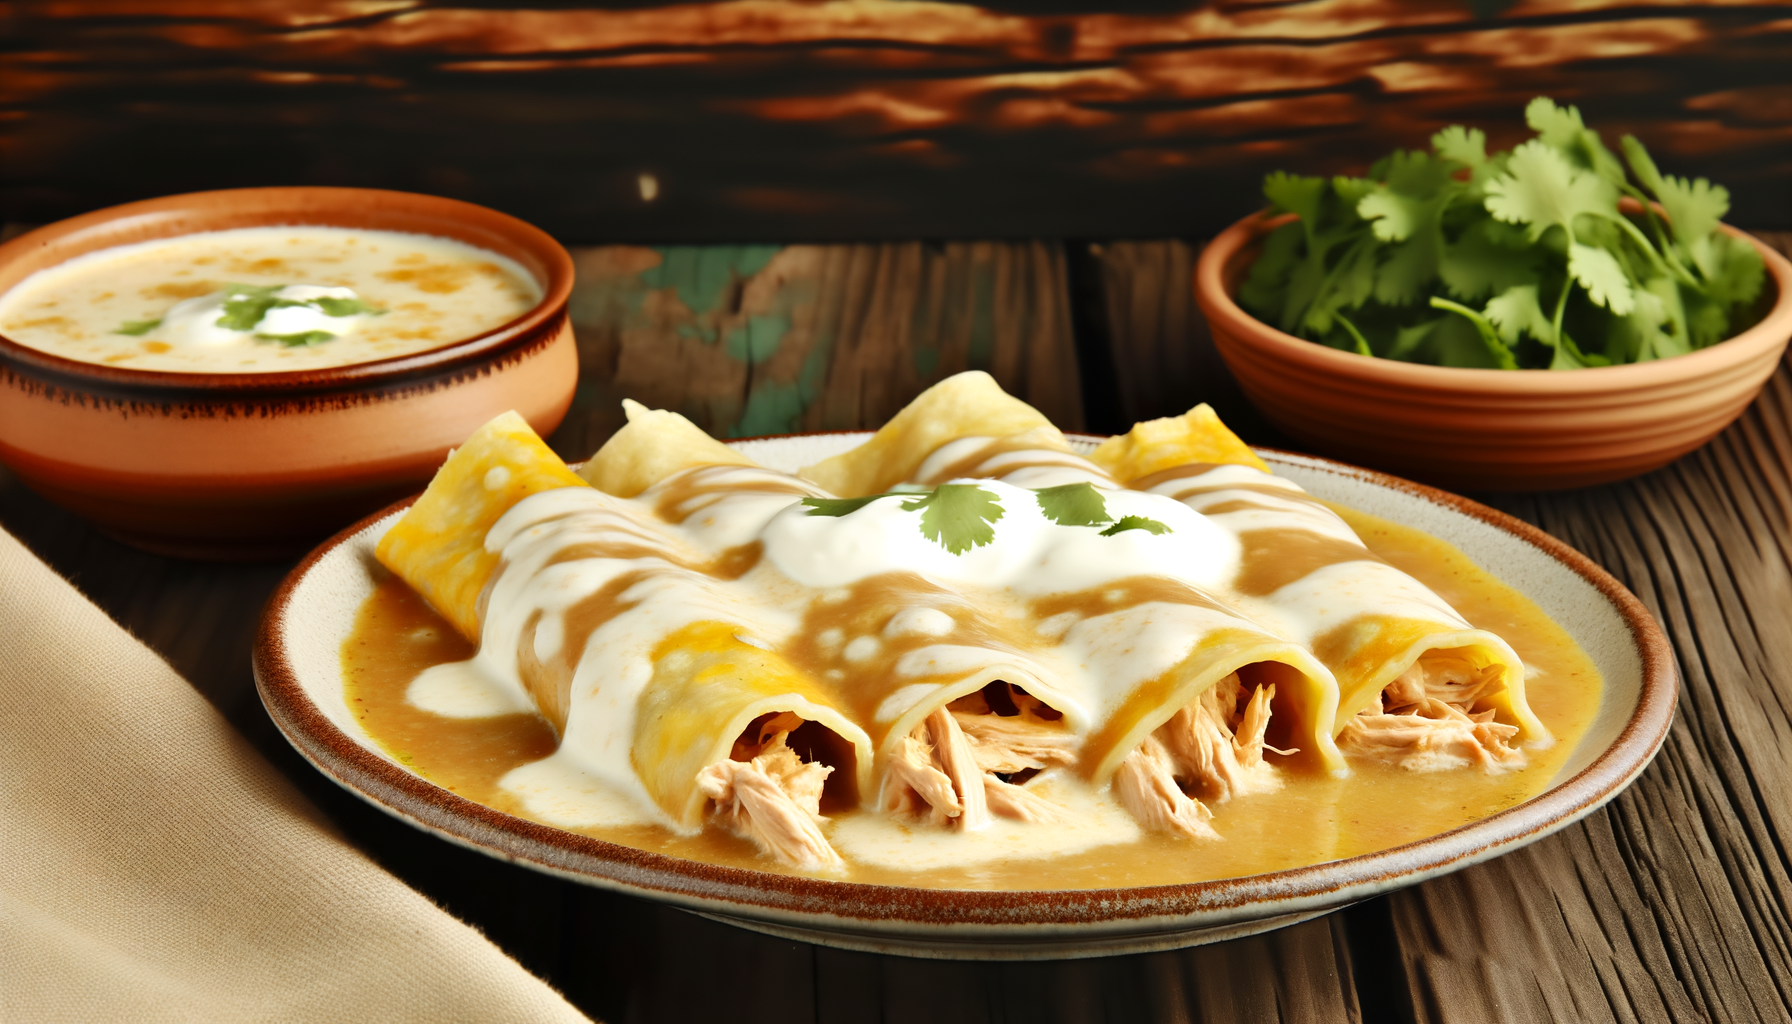 Tender shredded chicken in tortillas topped with a creamy Chicken soup and cheese, on a rustic table.